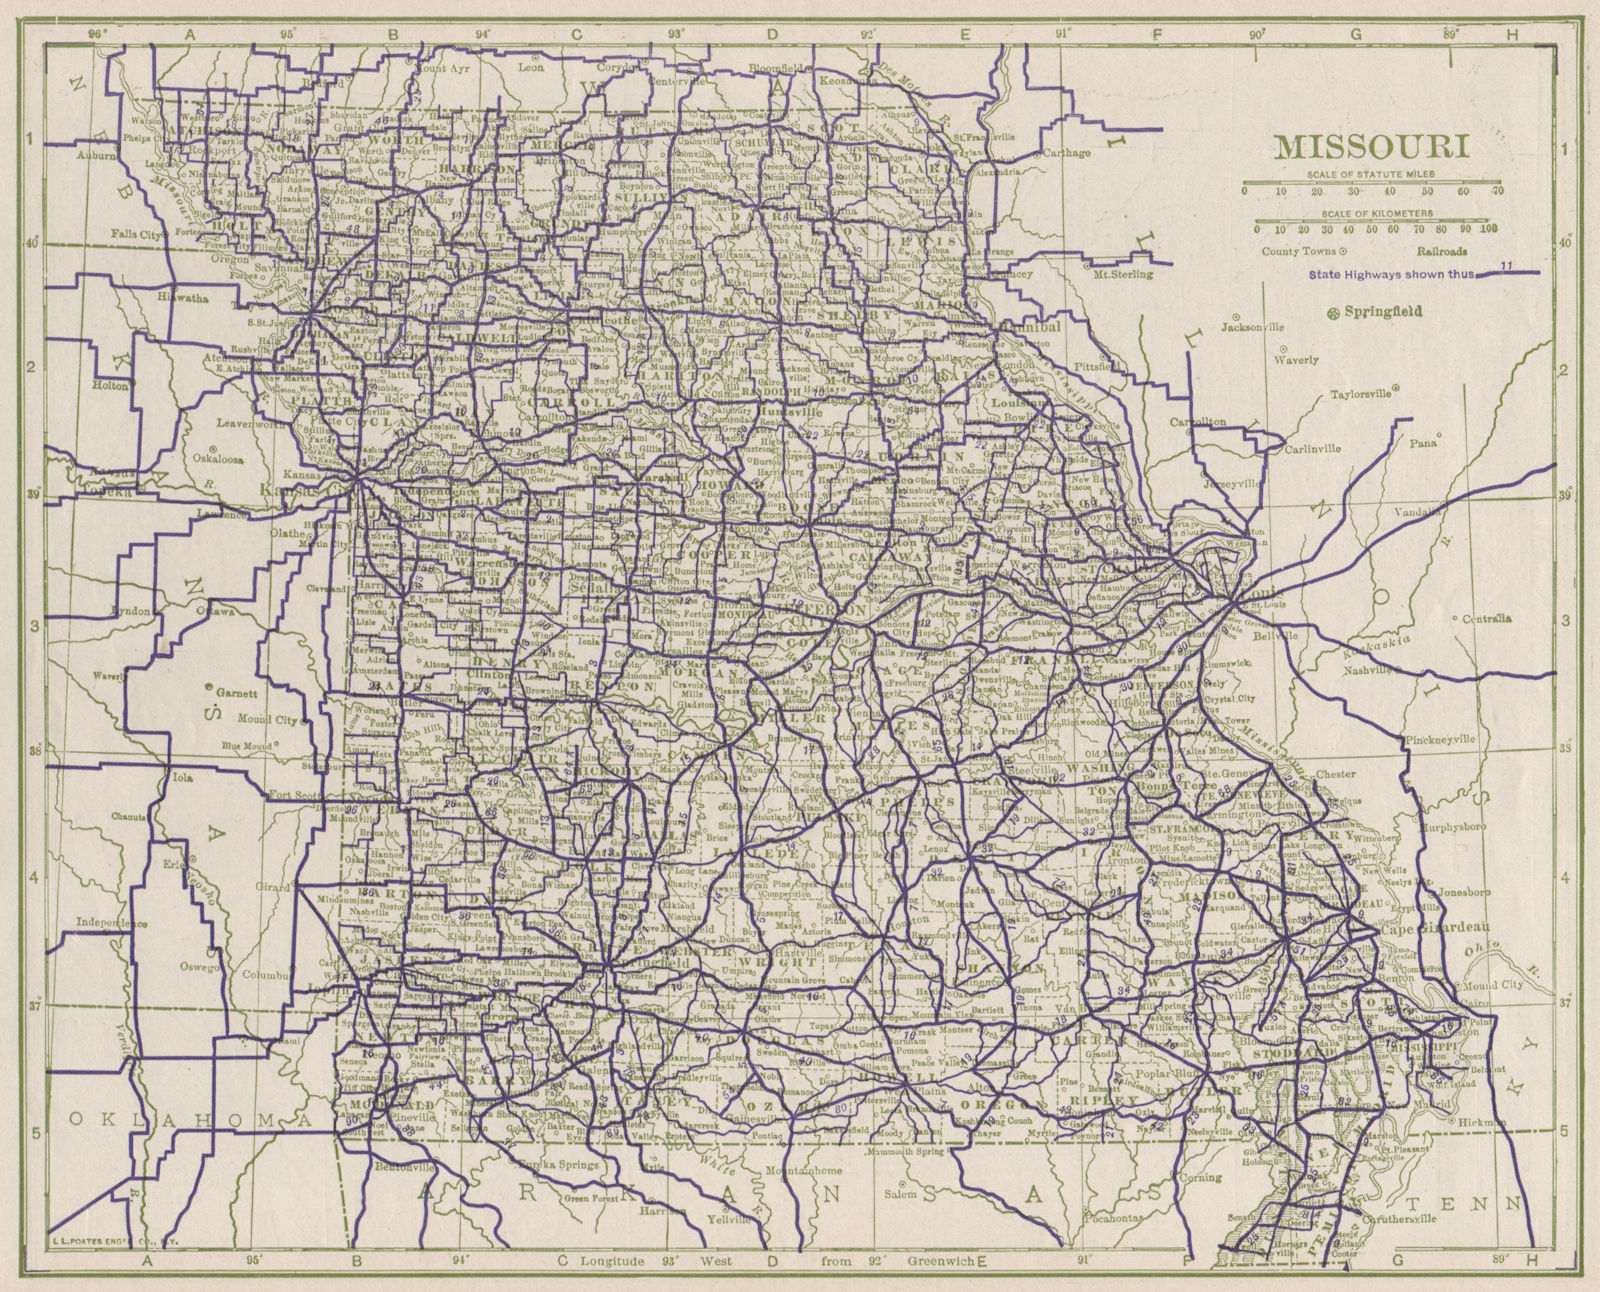 Associate Product Missouri State Highways. POATES 1925 old vintage map plan chart